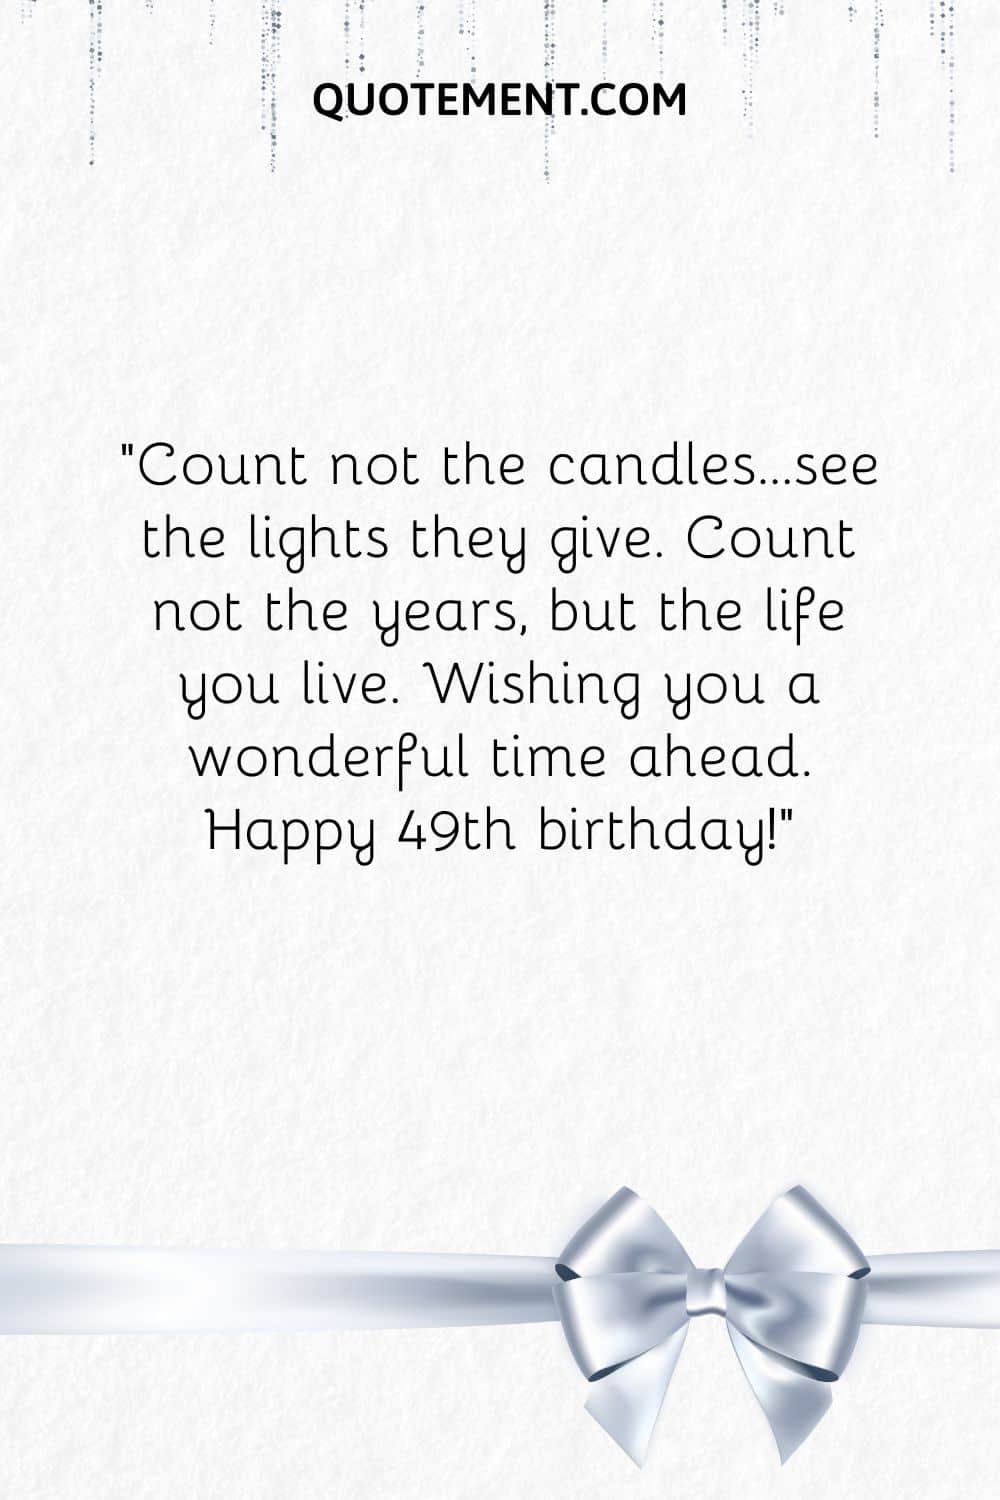 Count not the candles…see the lights they give